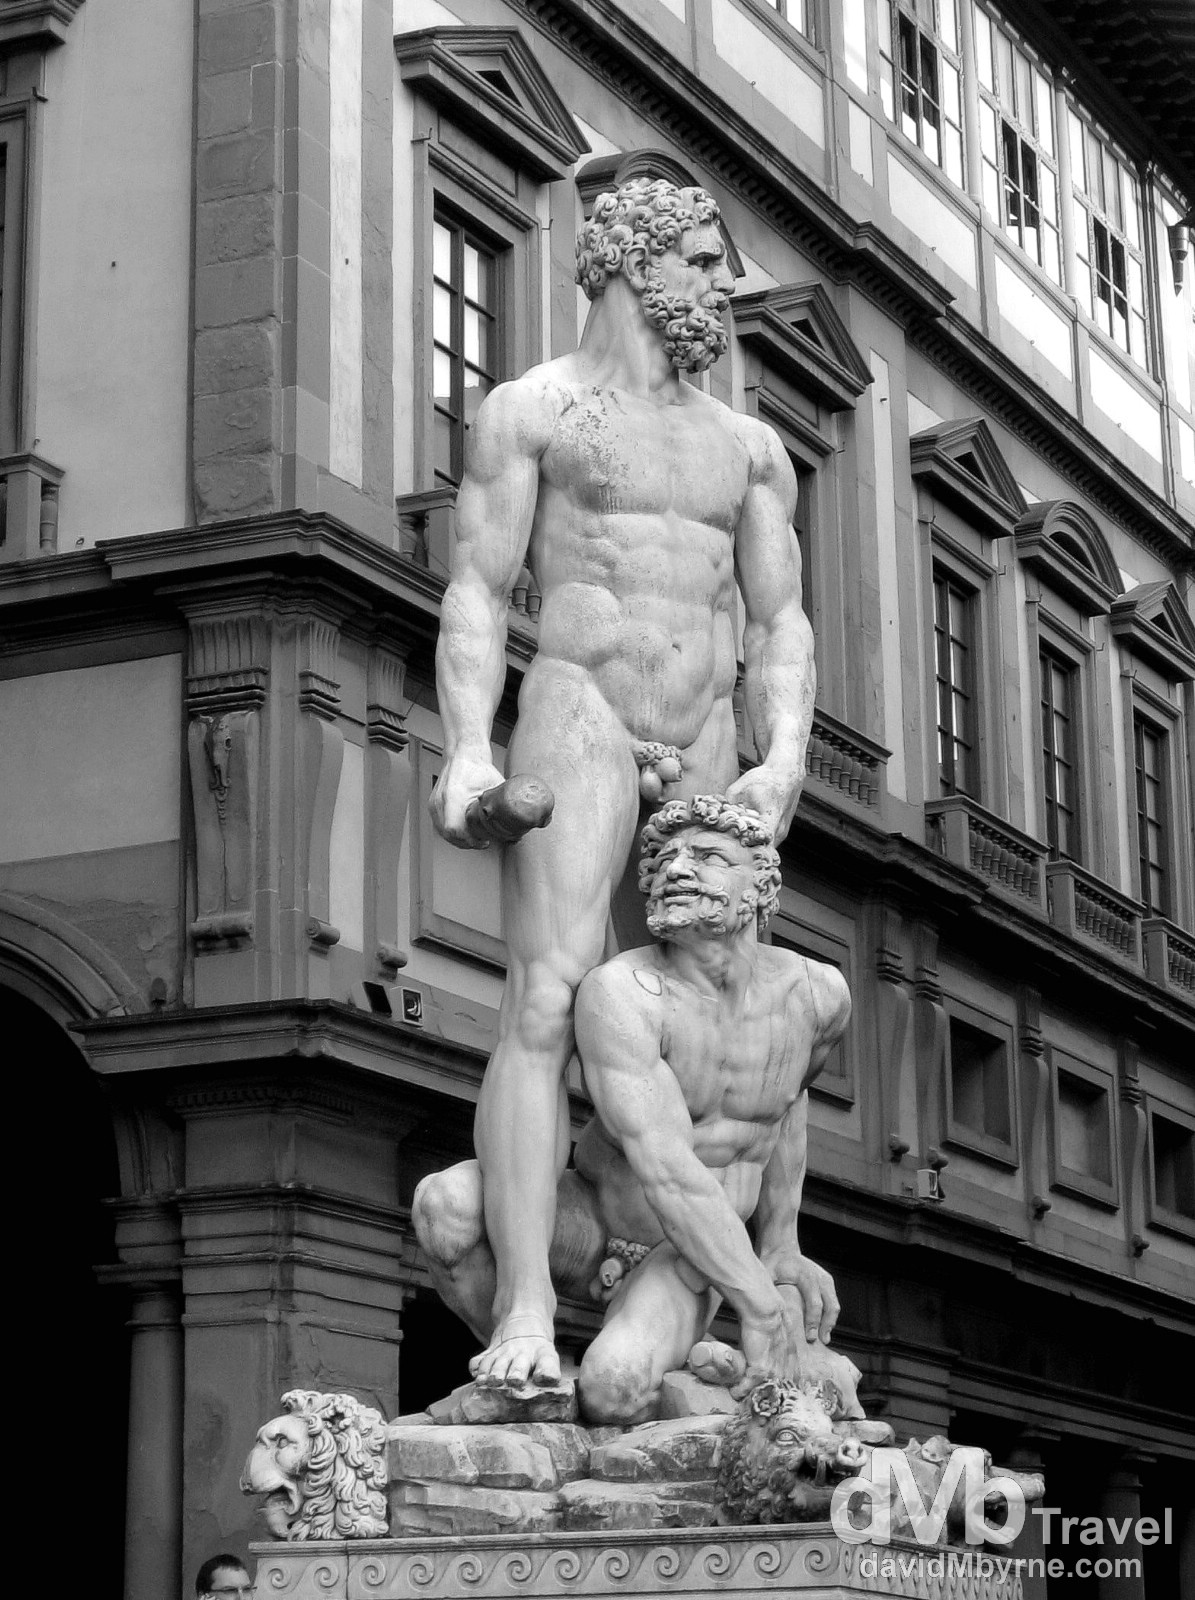 A statue fronting the Uffizi Gallery in Piazza della Signoria, Florence, Tuscany, Italy. August 28th, 2007.   